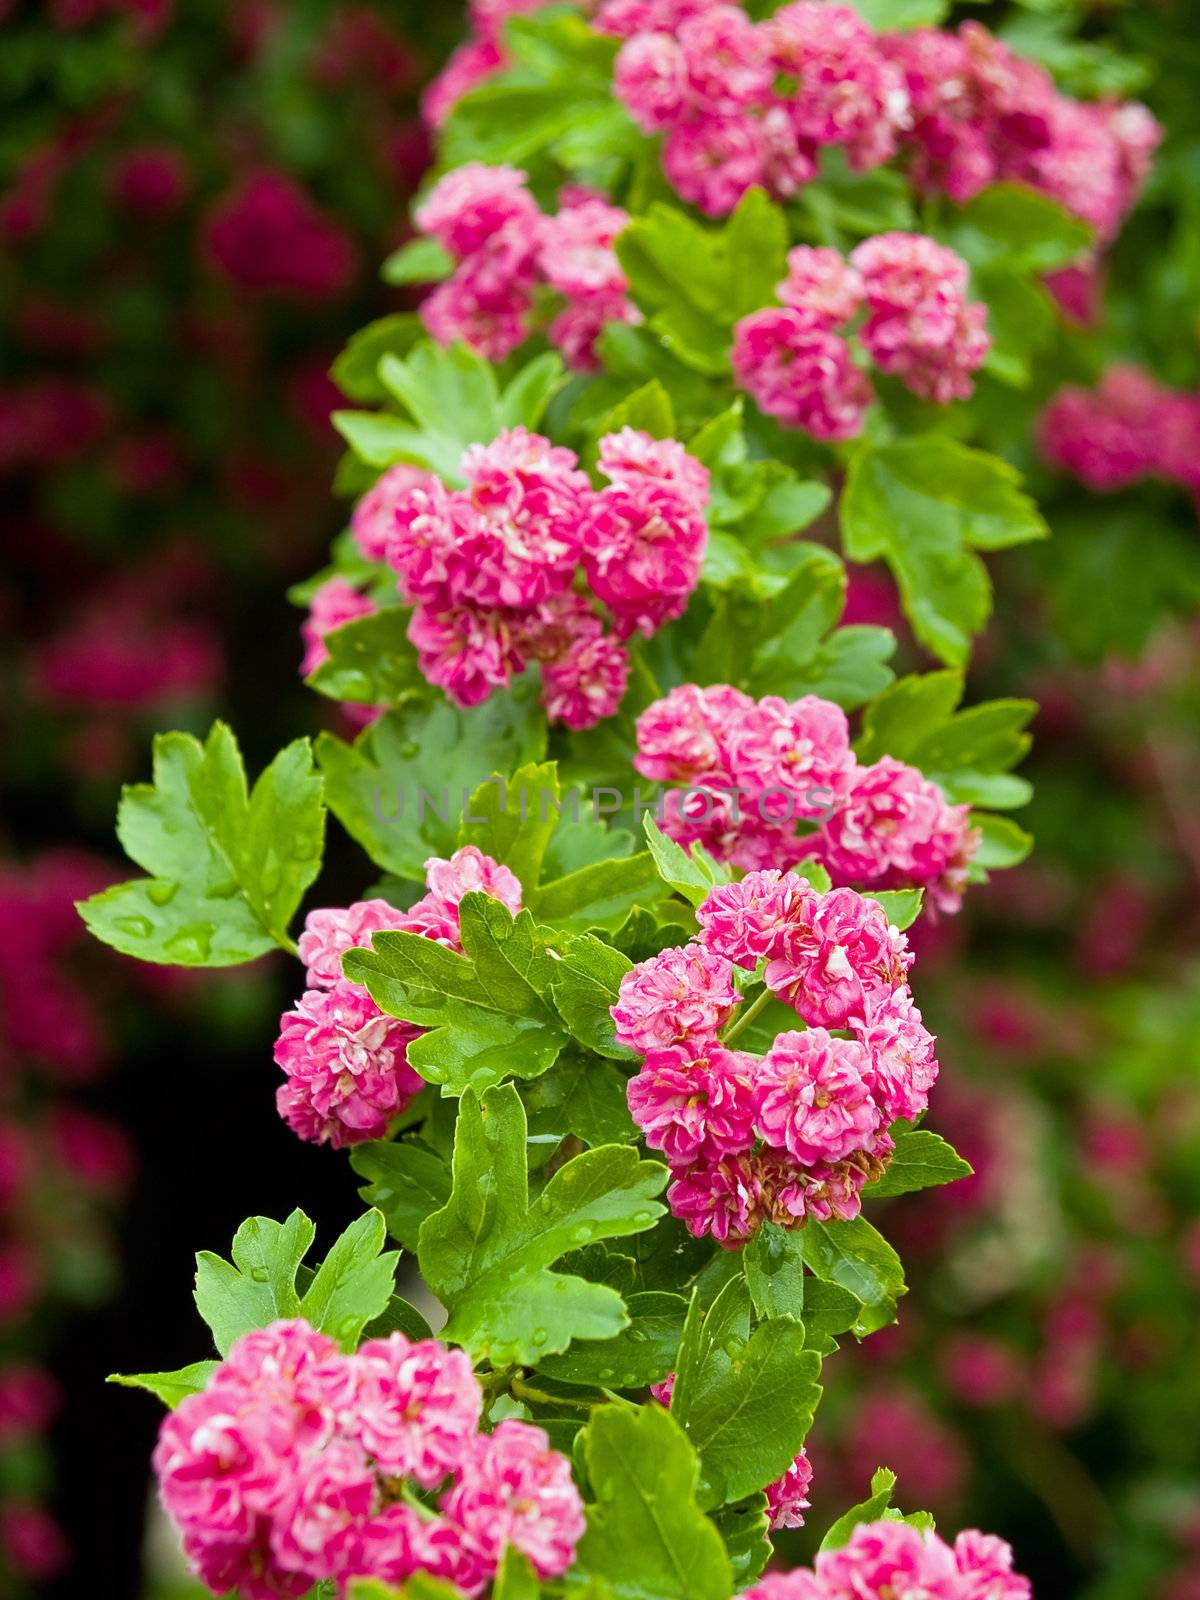 Pink flowers blooming on a tree in spring